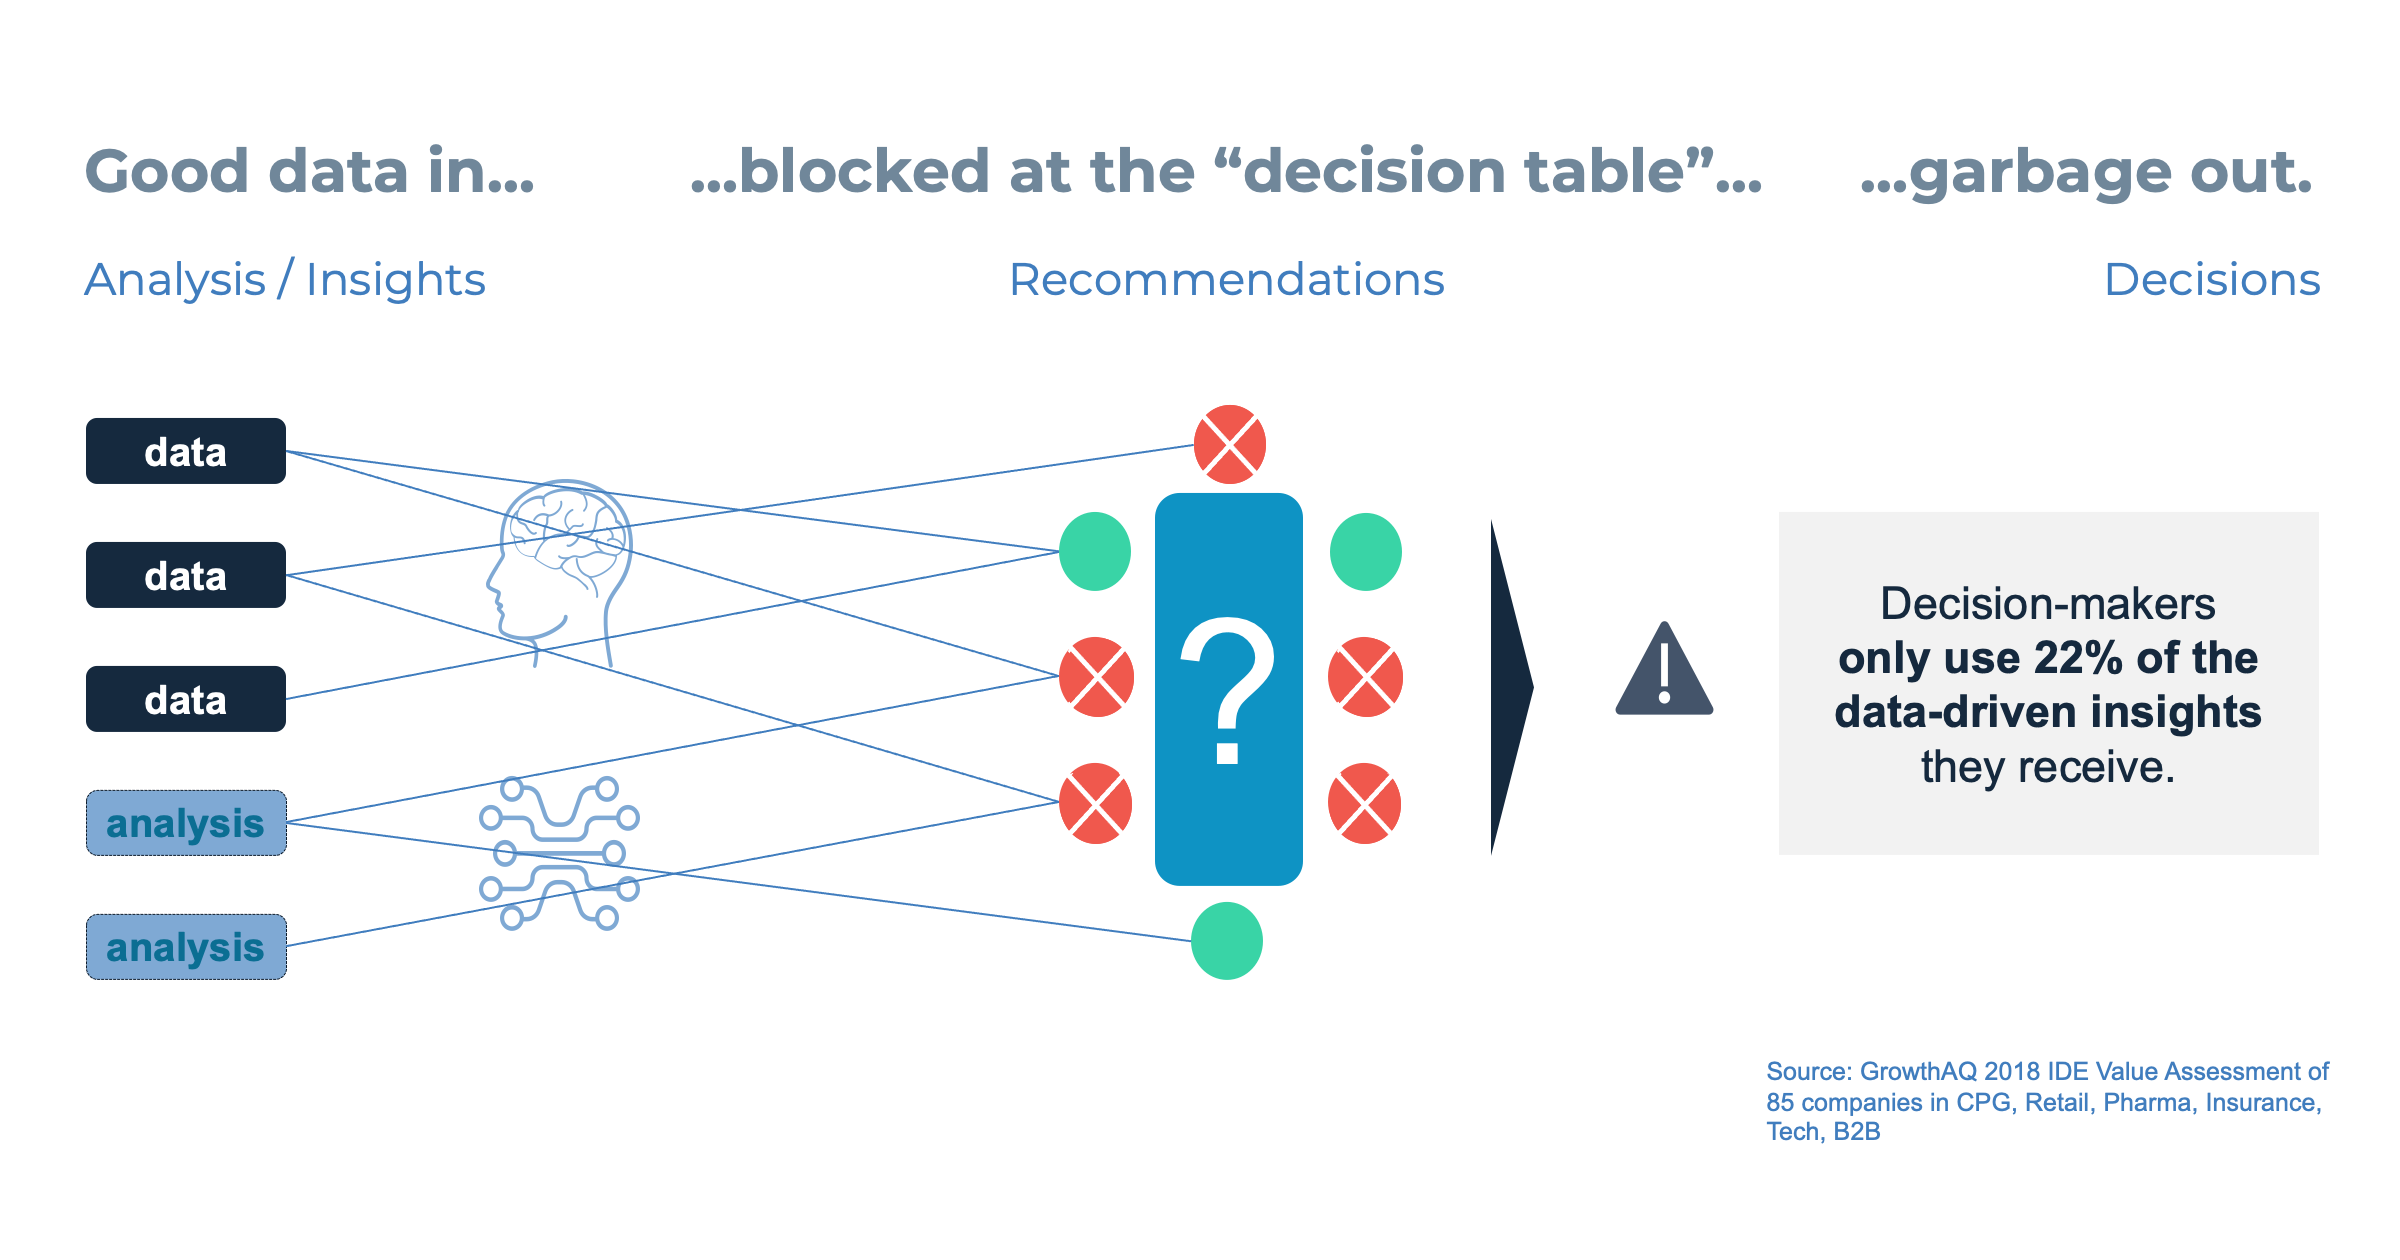 Good data in, blocked at the decision table, garbage out.